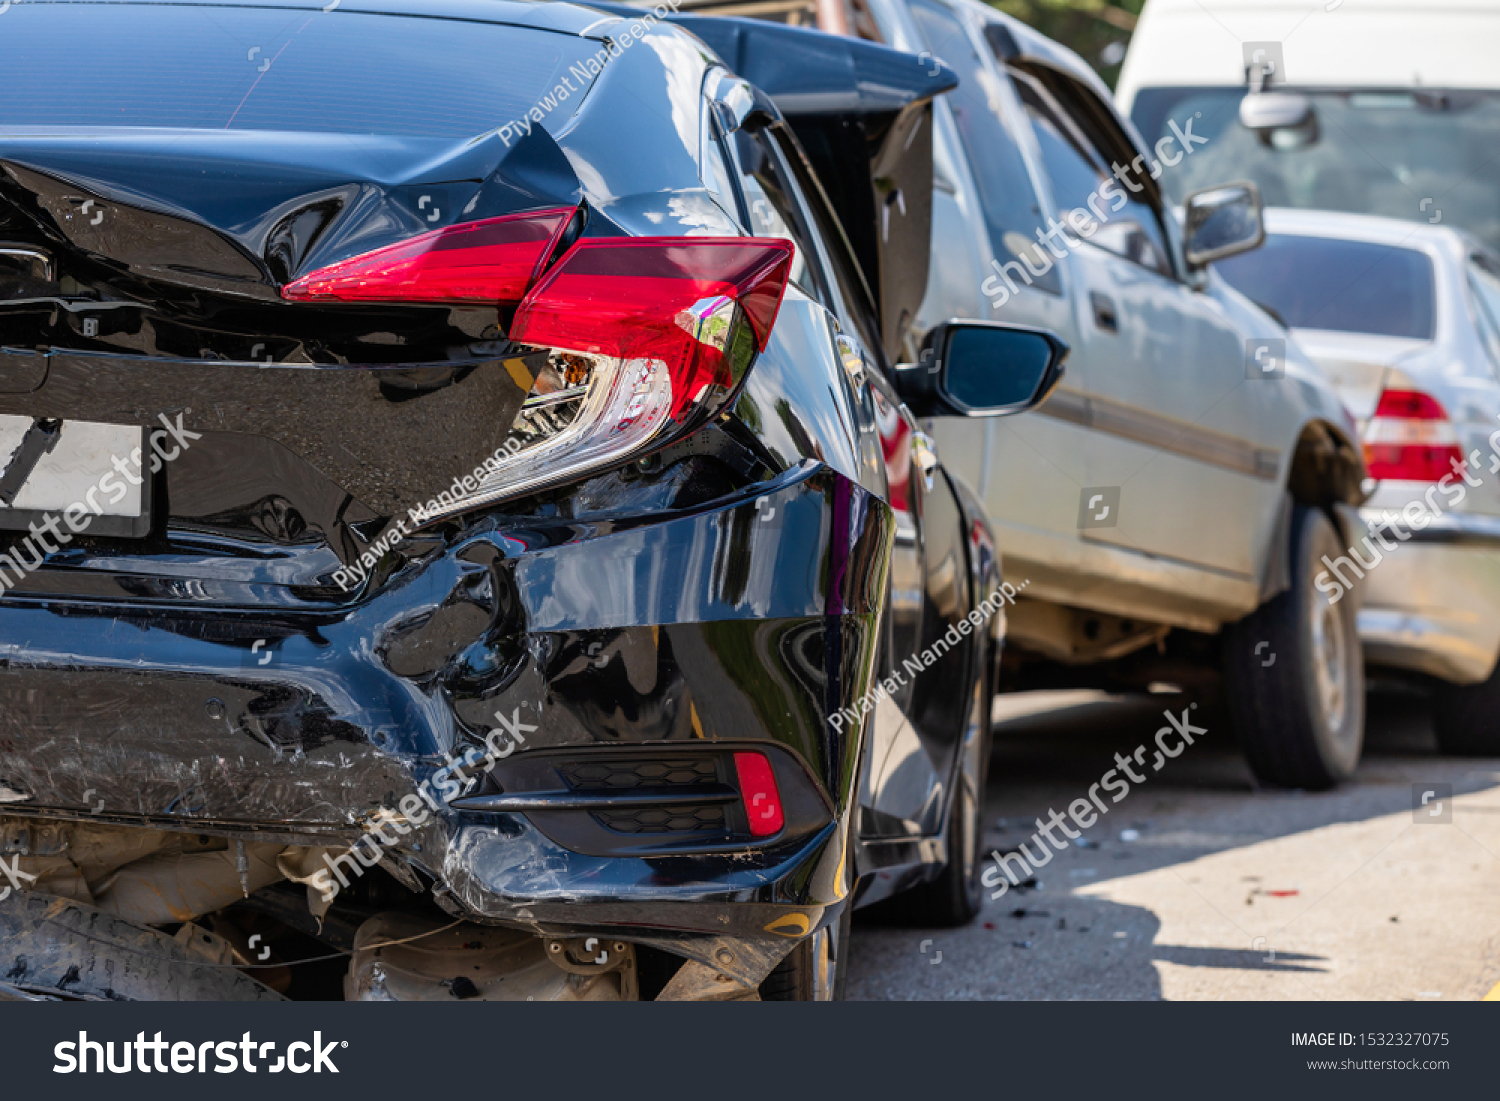 Heavy accident, Modern car accident involving many cars on the road in Thailand #1532327075